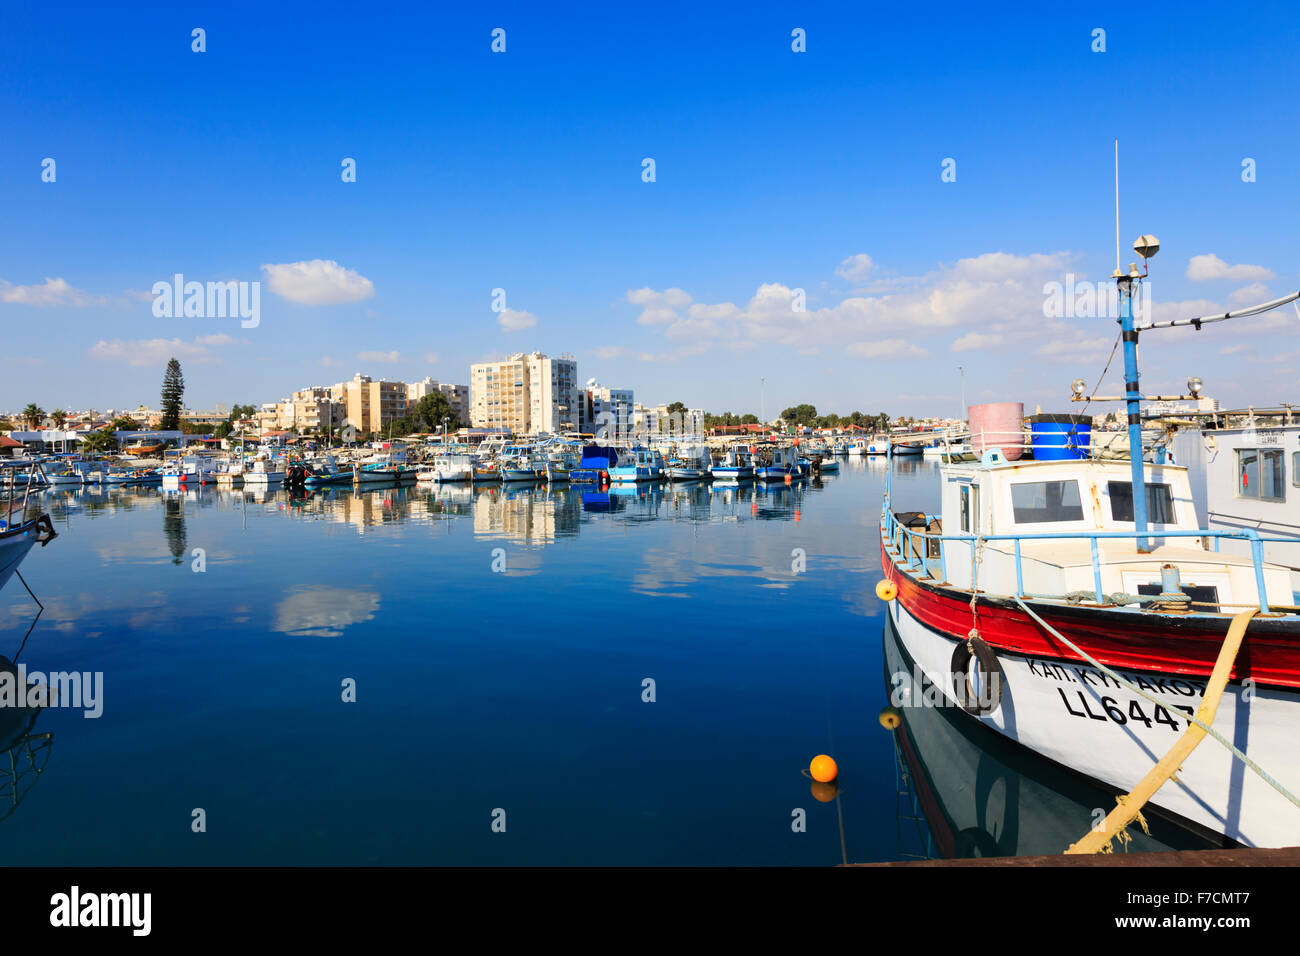 Larnaca fishing harbour with local traditional fishing boats, Stock Photo